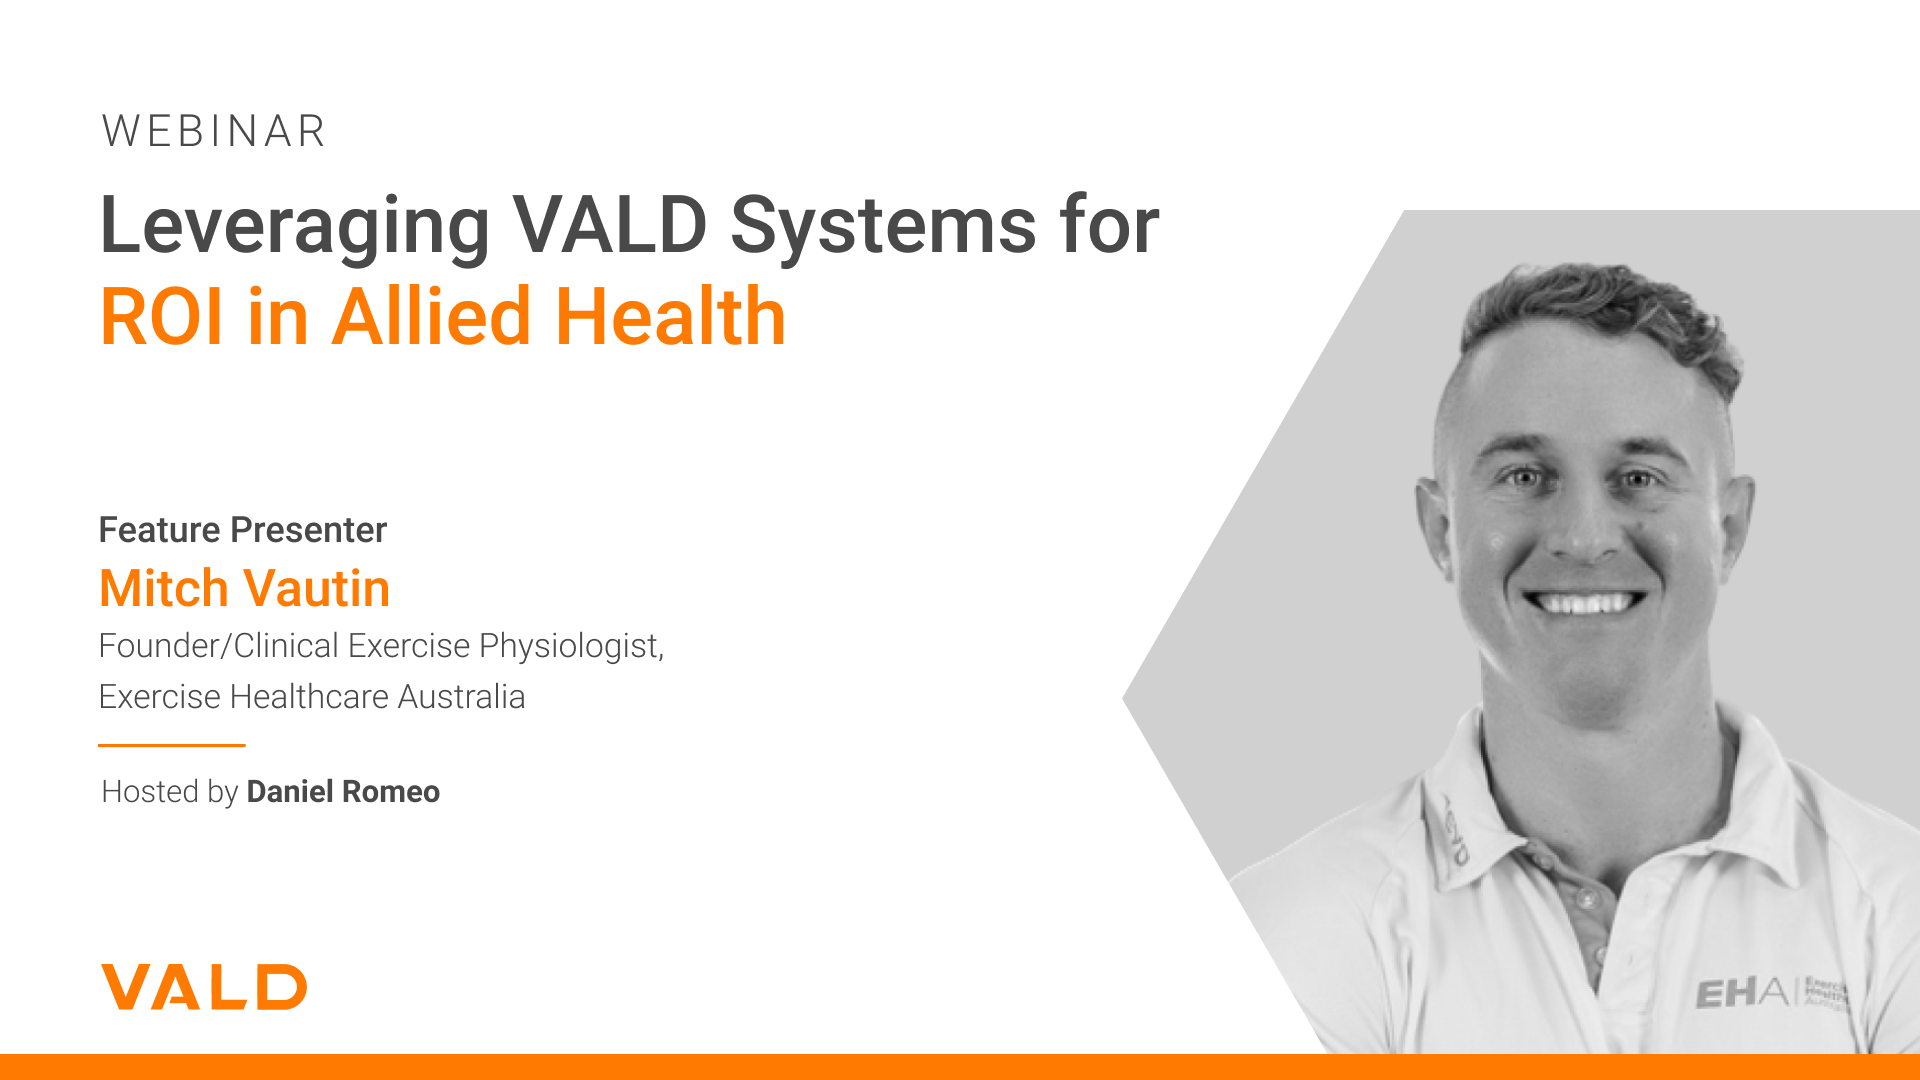 Leveraging VALD Systems for ROI in Allied Health